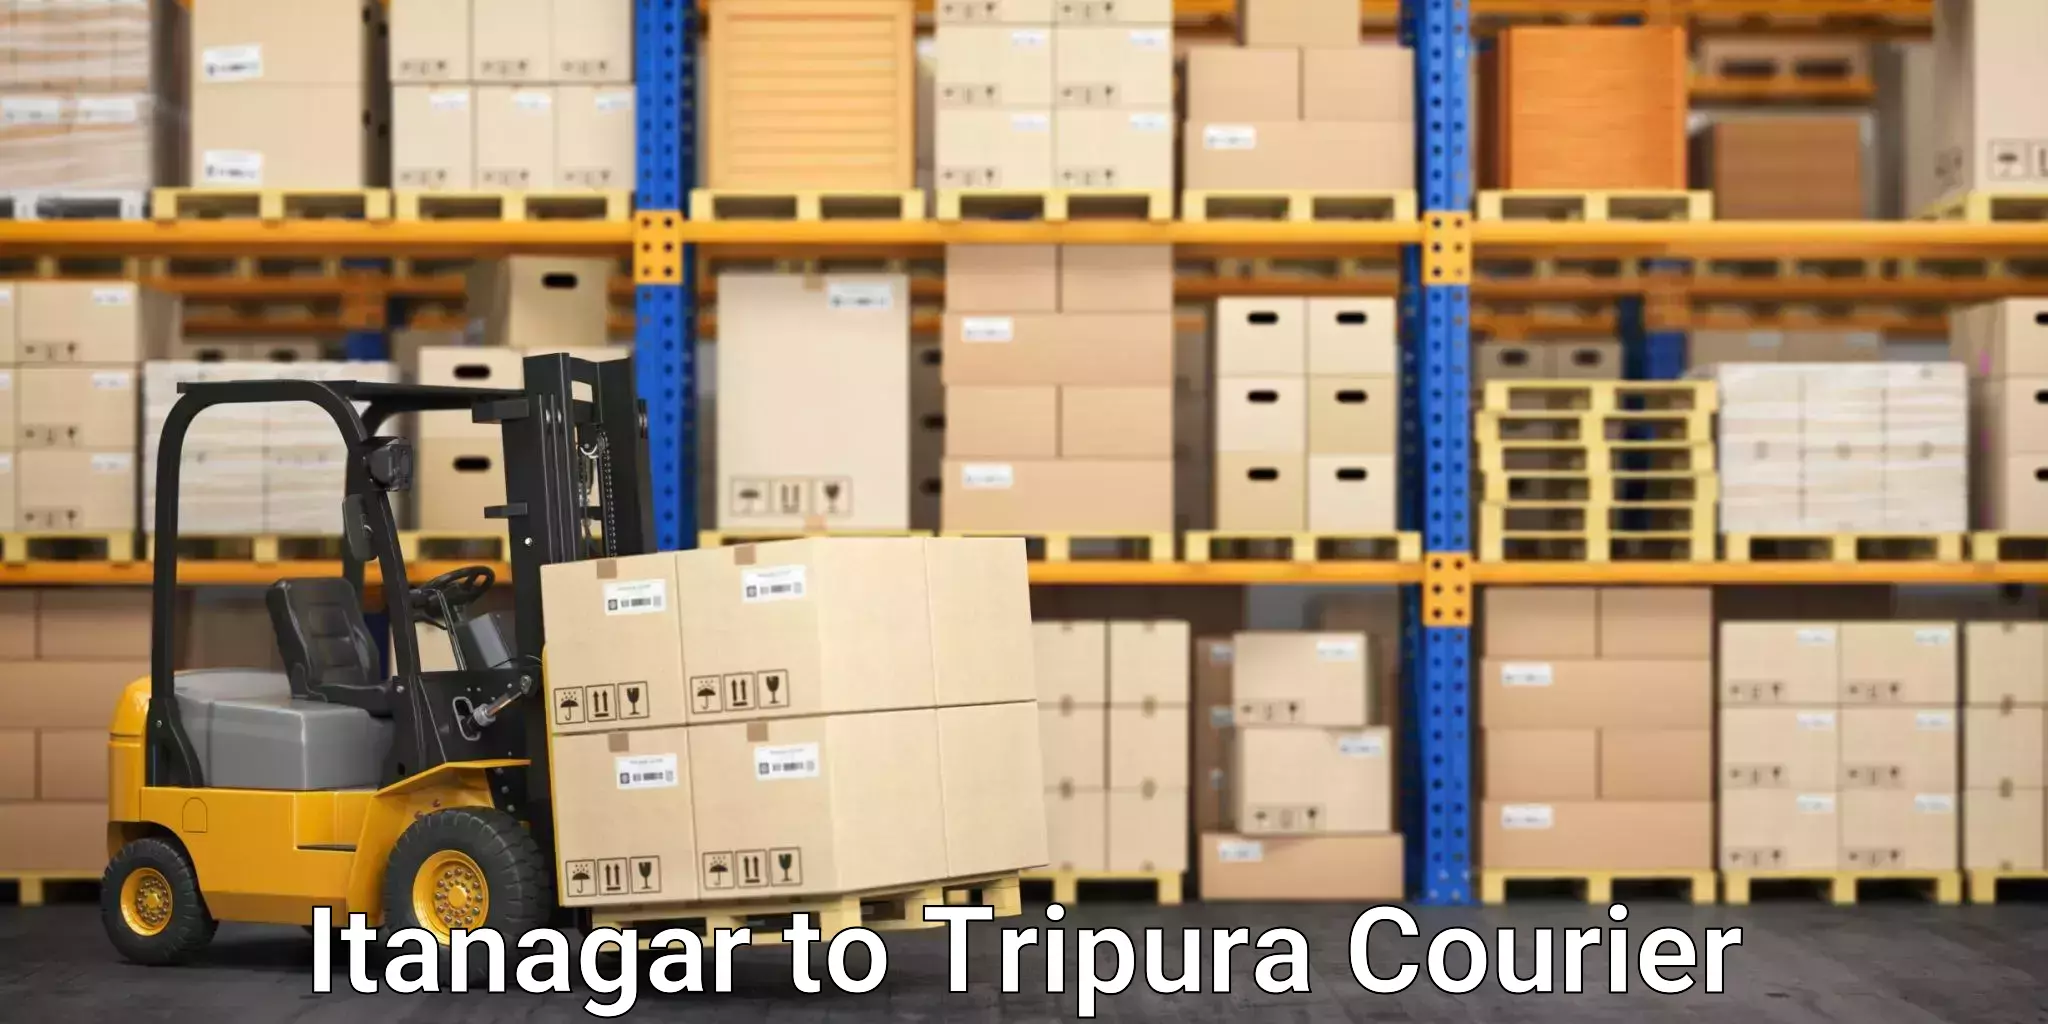 State-of-the-art courier technology Itanagar to Tripura